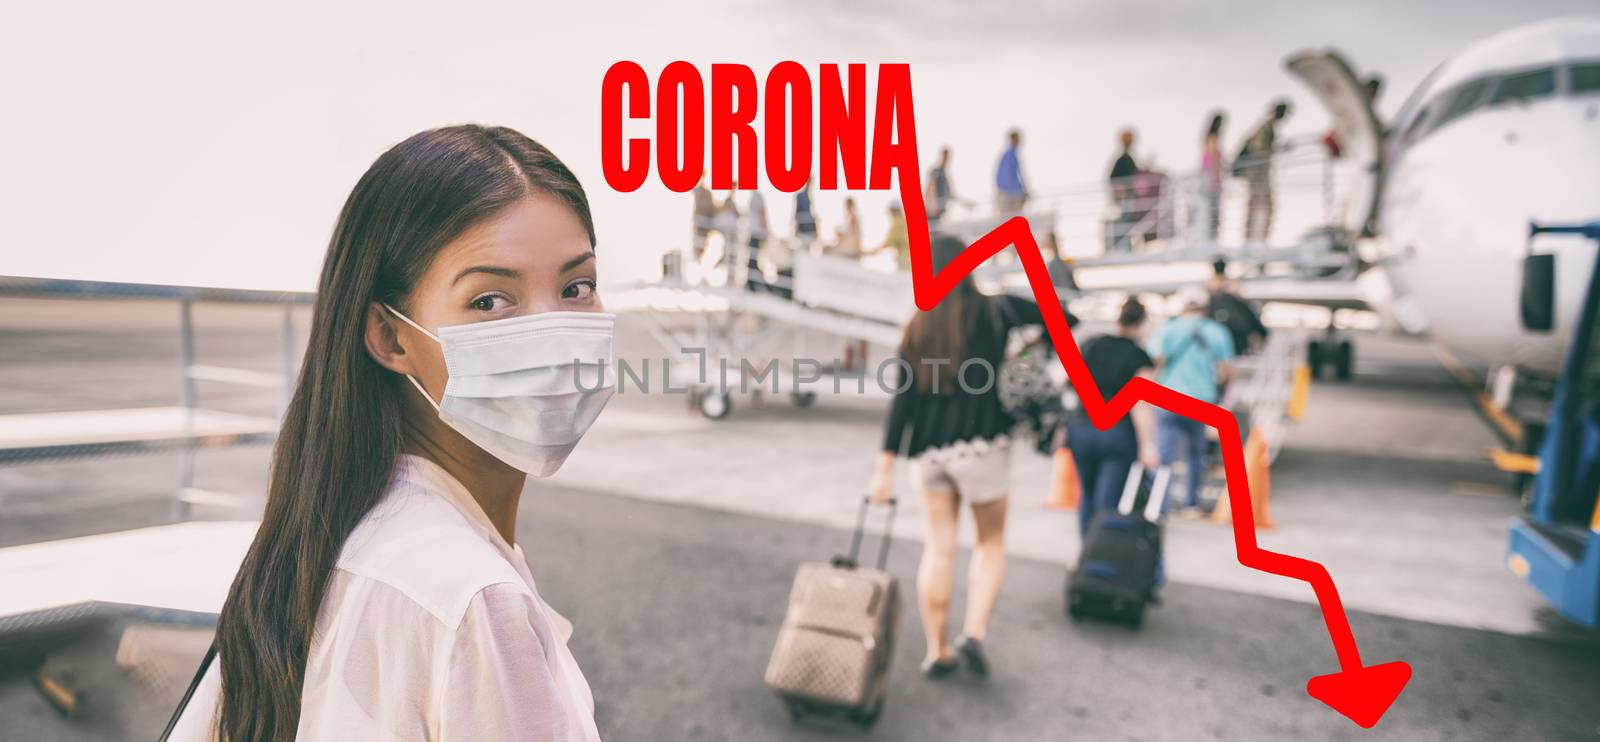 Coronavirus crashing stock market causing new financial crisis and bear market recession and economic downturn. Woman wearing surgical mask for corona virus going on plane by negative graph of stocks